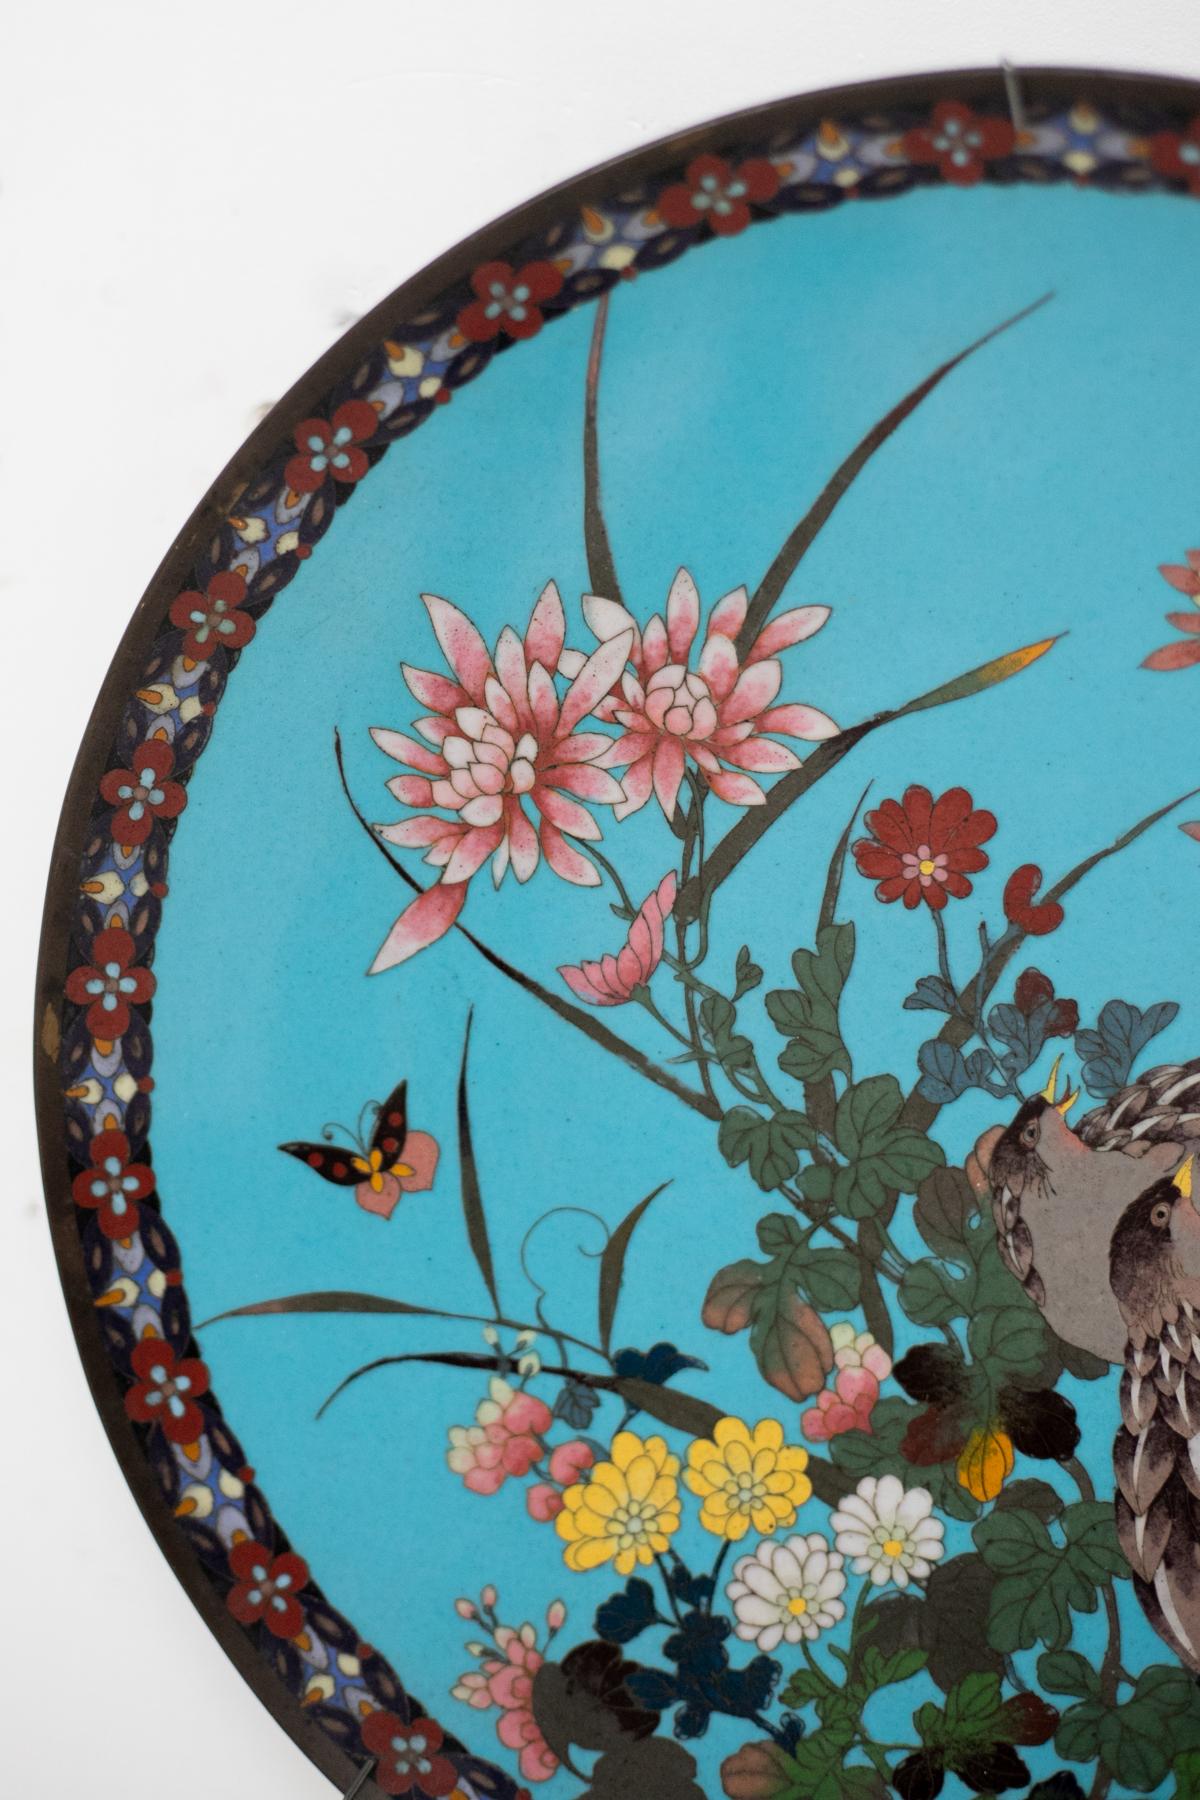 A bronze and cloisonné enamel round plate designed in Japan at the end of the 19th century, during the 'Meiji' era, which can be translated as 'enlightened government'. This historical period in Japan was marked by the rule of Emperor Mutsuhito and